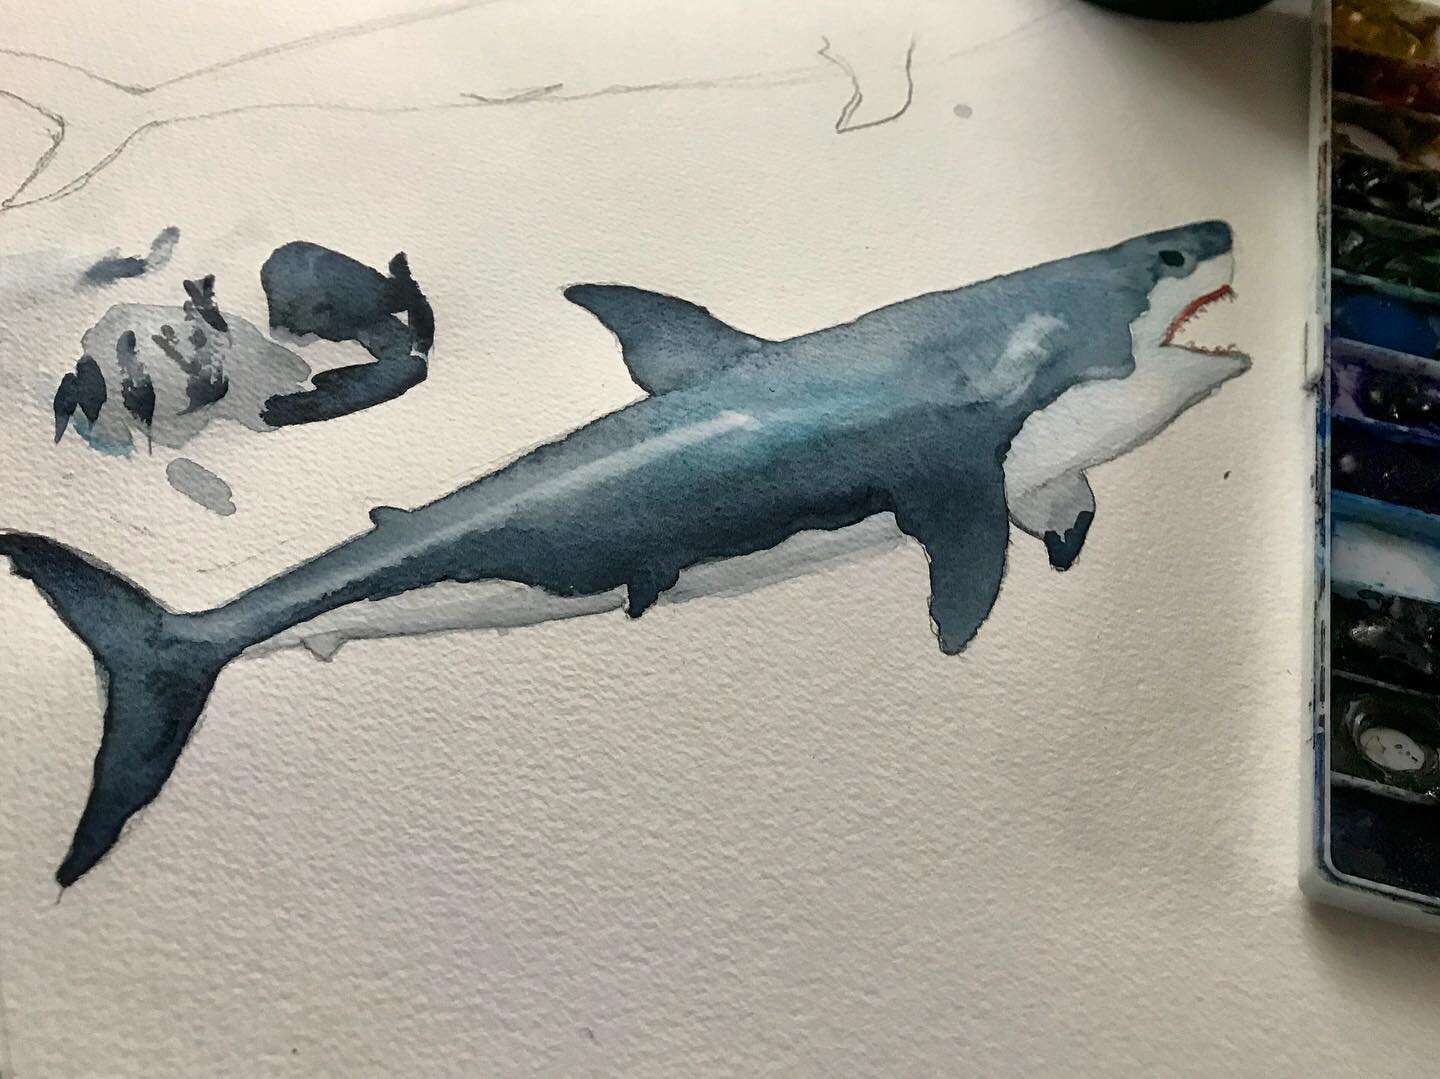 It&rsquo;s summer in Massachusetts. Inspiration for my next kinetic painting. 
.
.
.
.
#shark #jaws #greatwhitesharks #paperart #paperartist #papersculpture #papersculptureartist #papercraft #papercut #automata #kineticart #kineticsculpture #handcut 